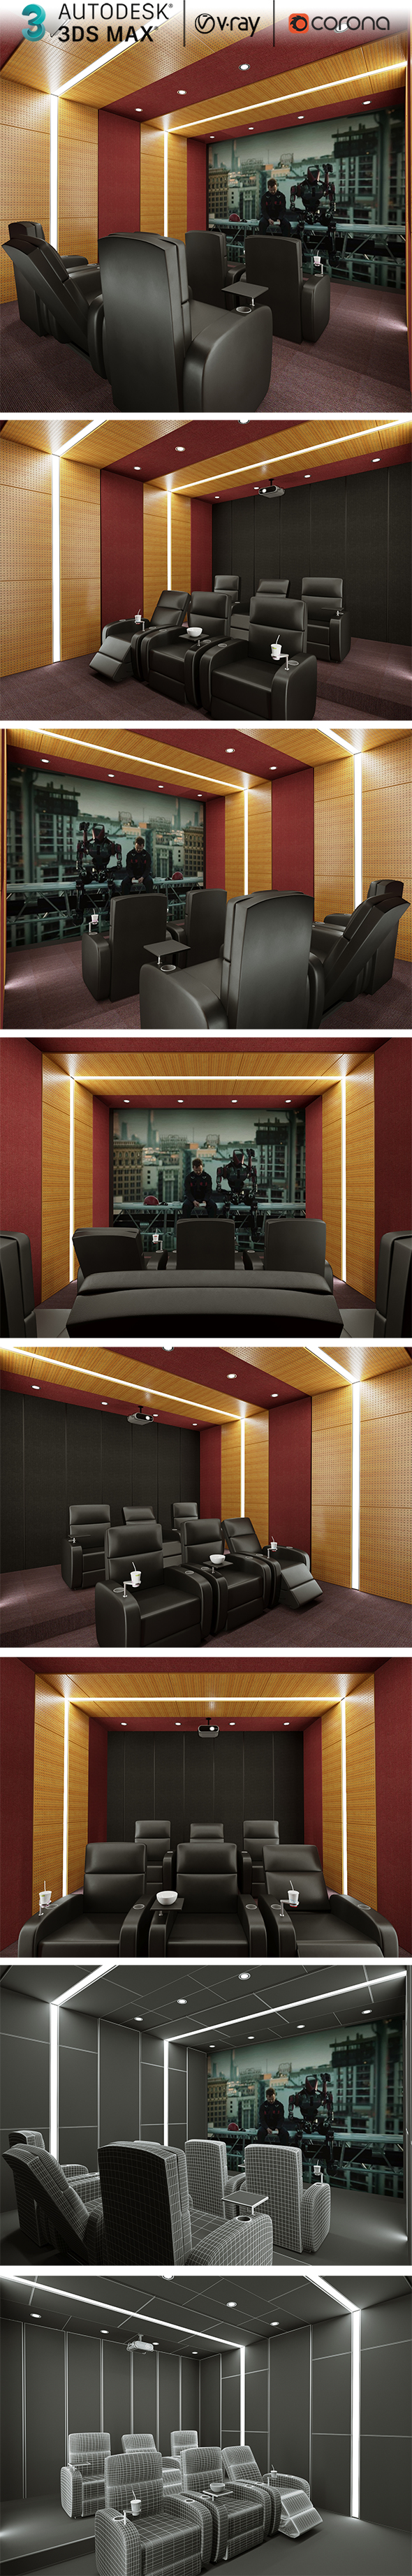 [DOWNLOAD]Home Cinema Design Collection 17